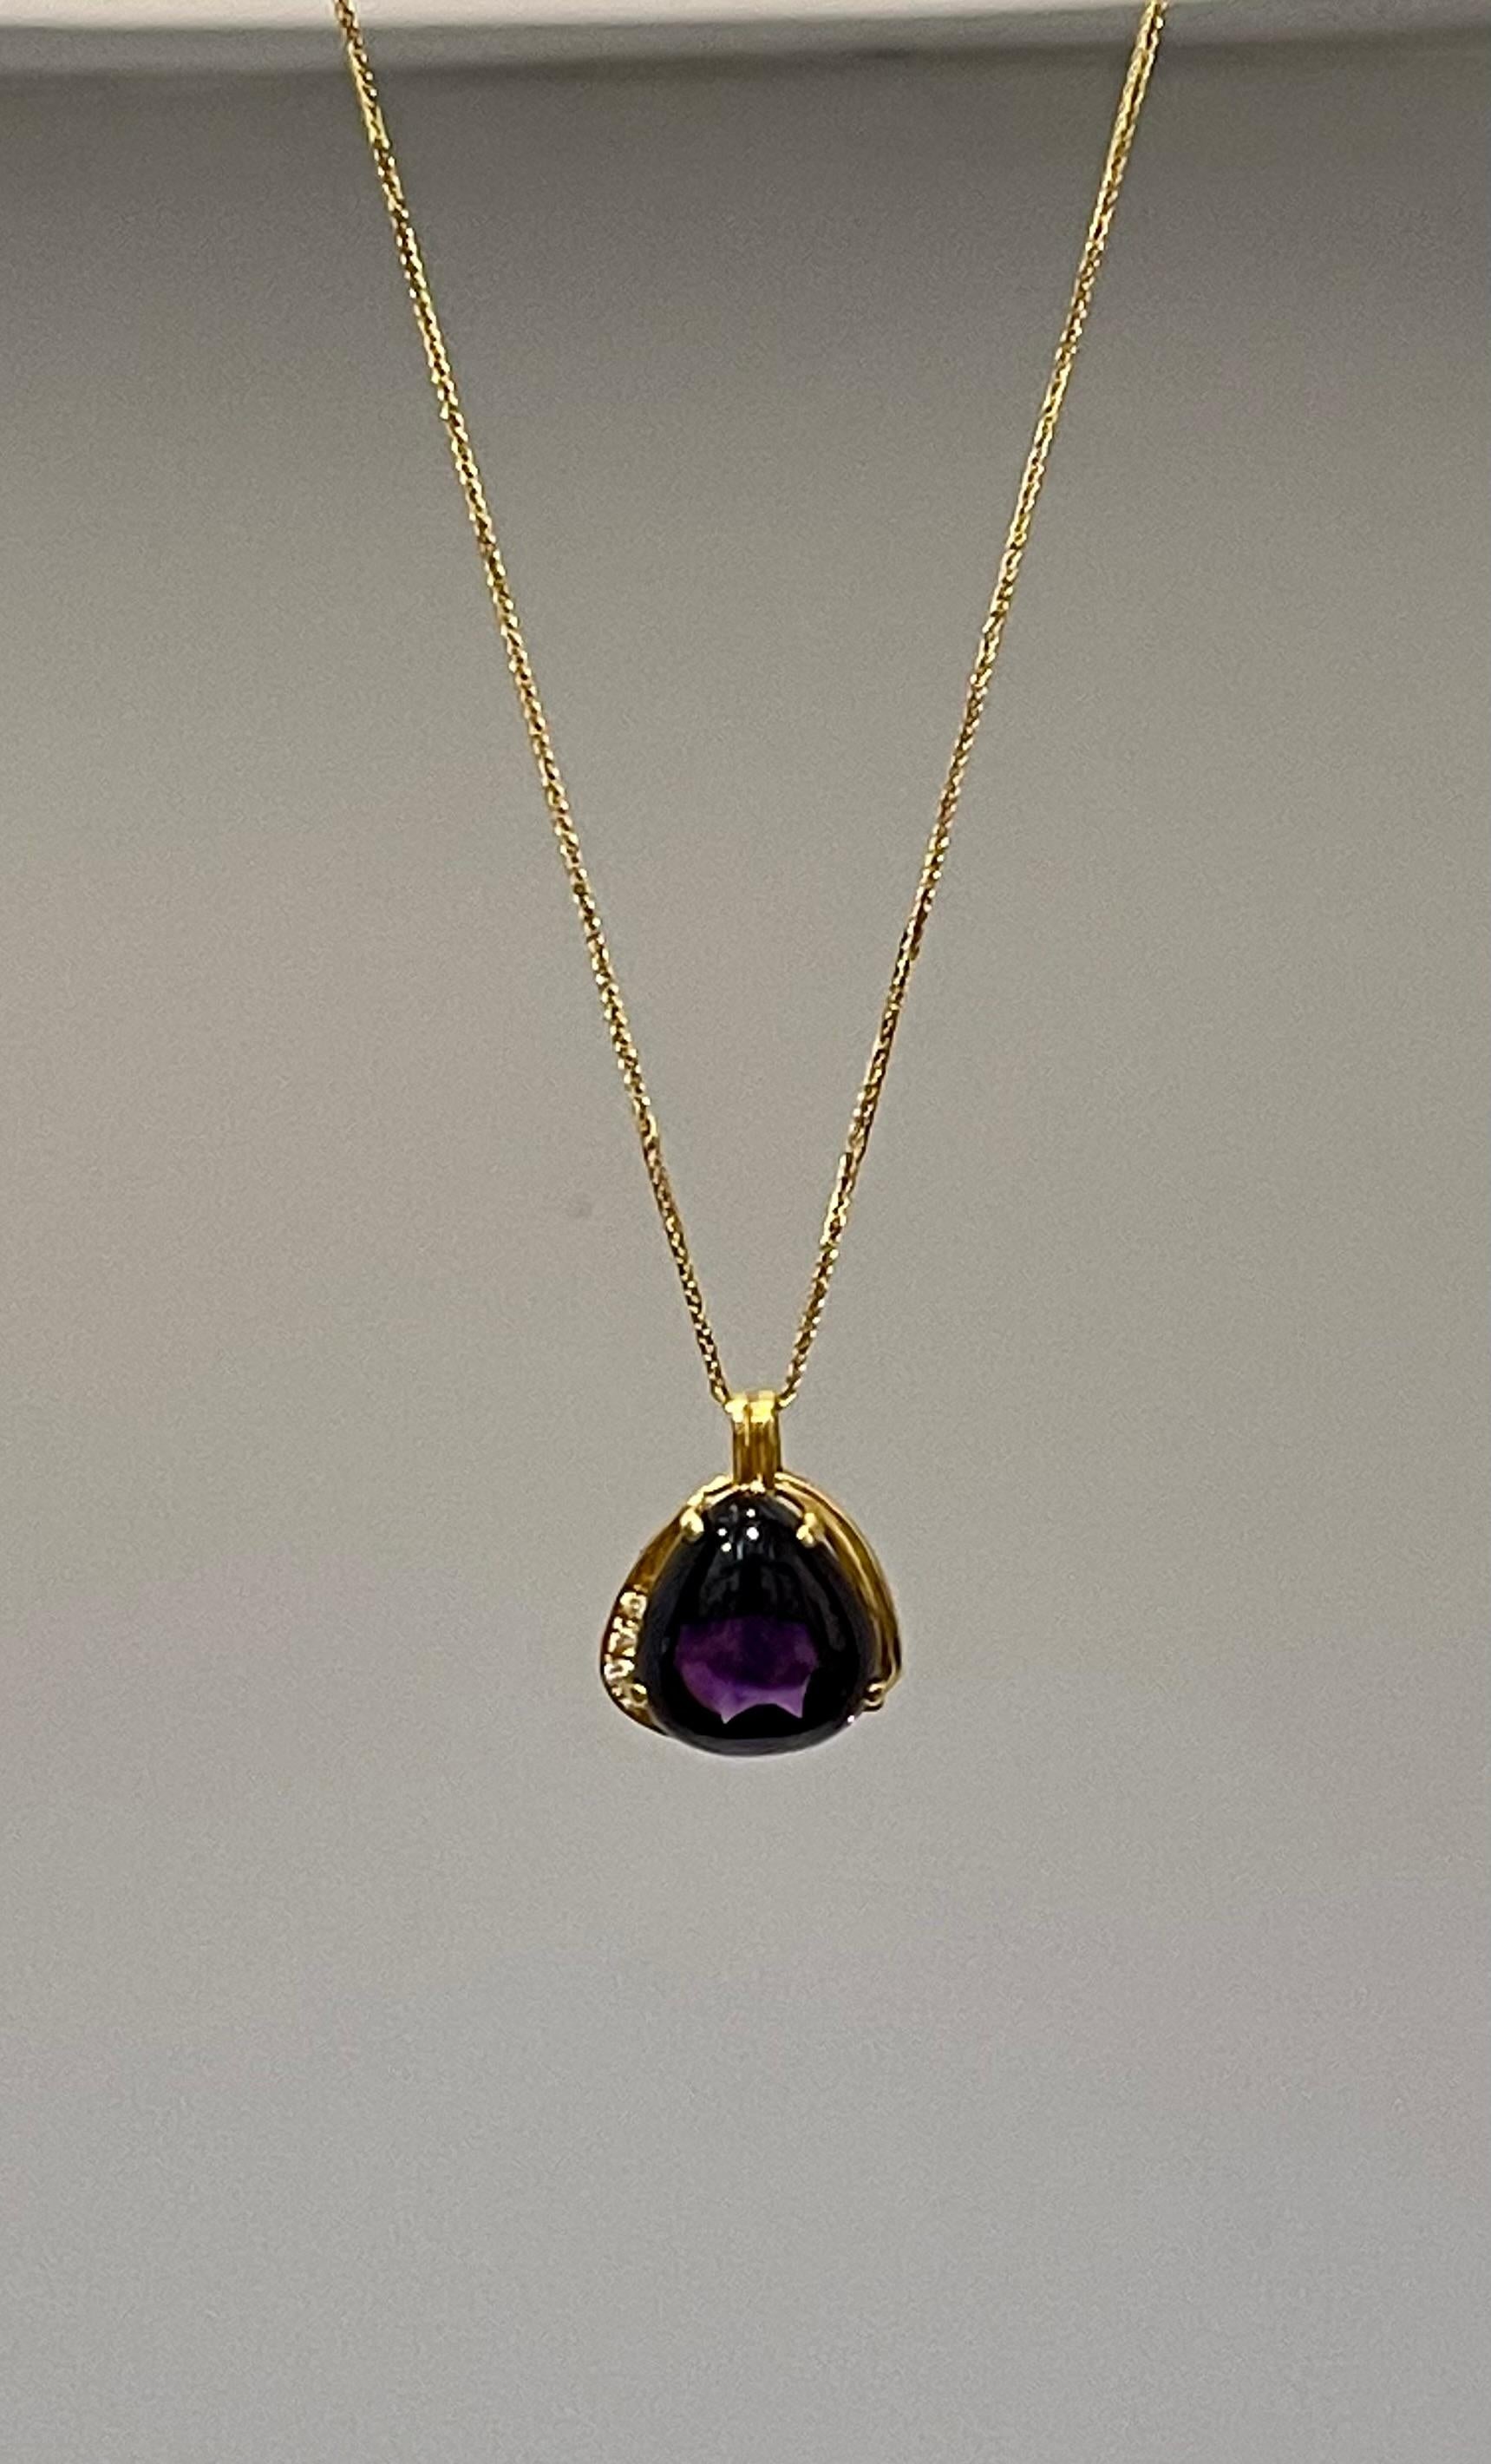 10 Carat Tear Drop Amethyst and Diamonds Pendent Necklace 18 Karat Yellow Gold For Sale 9